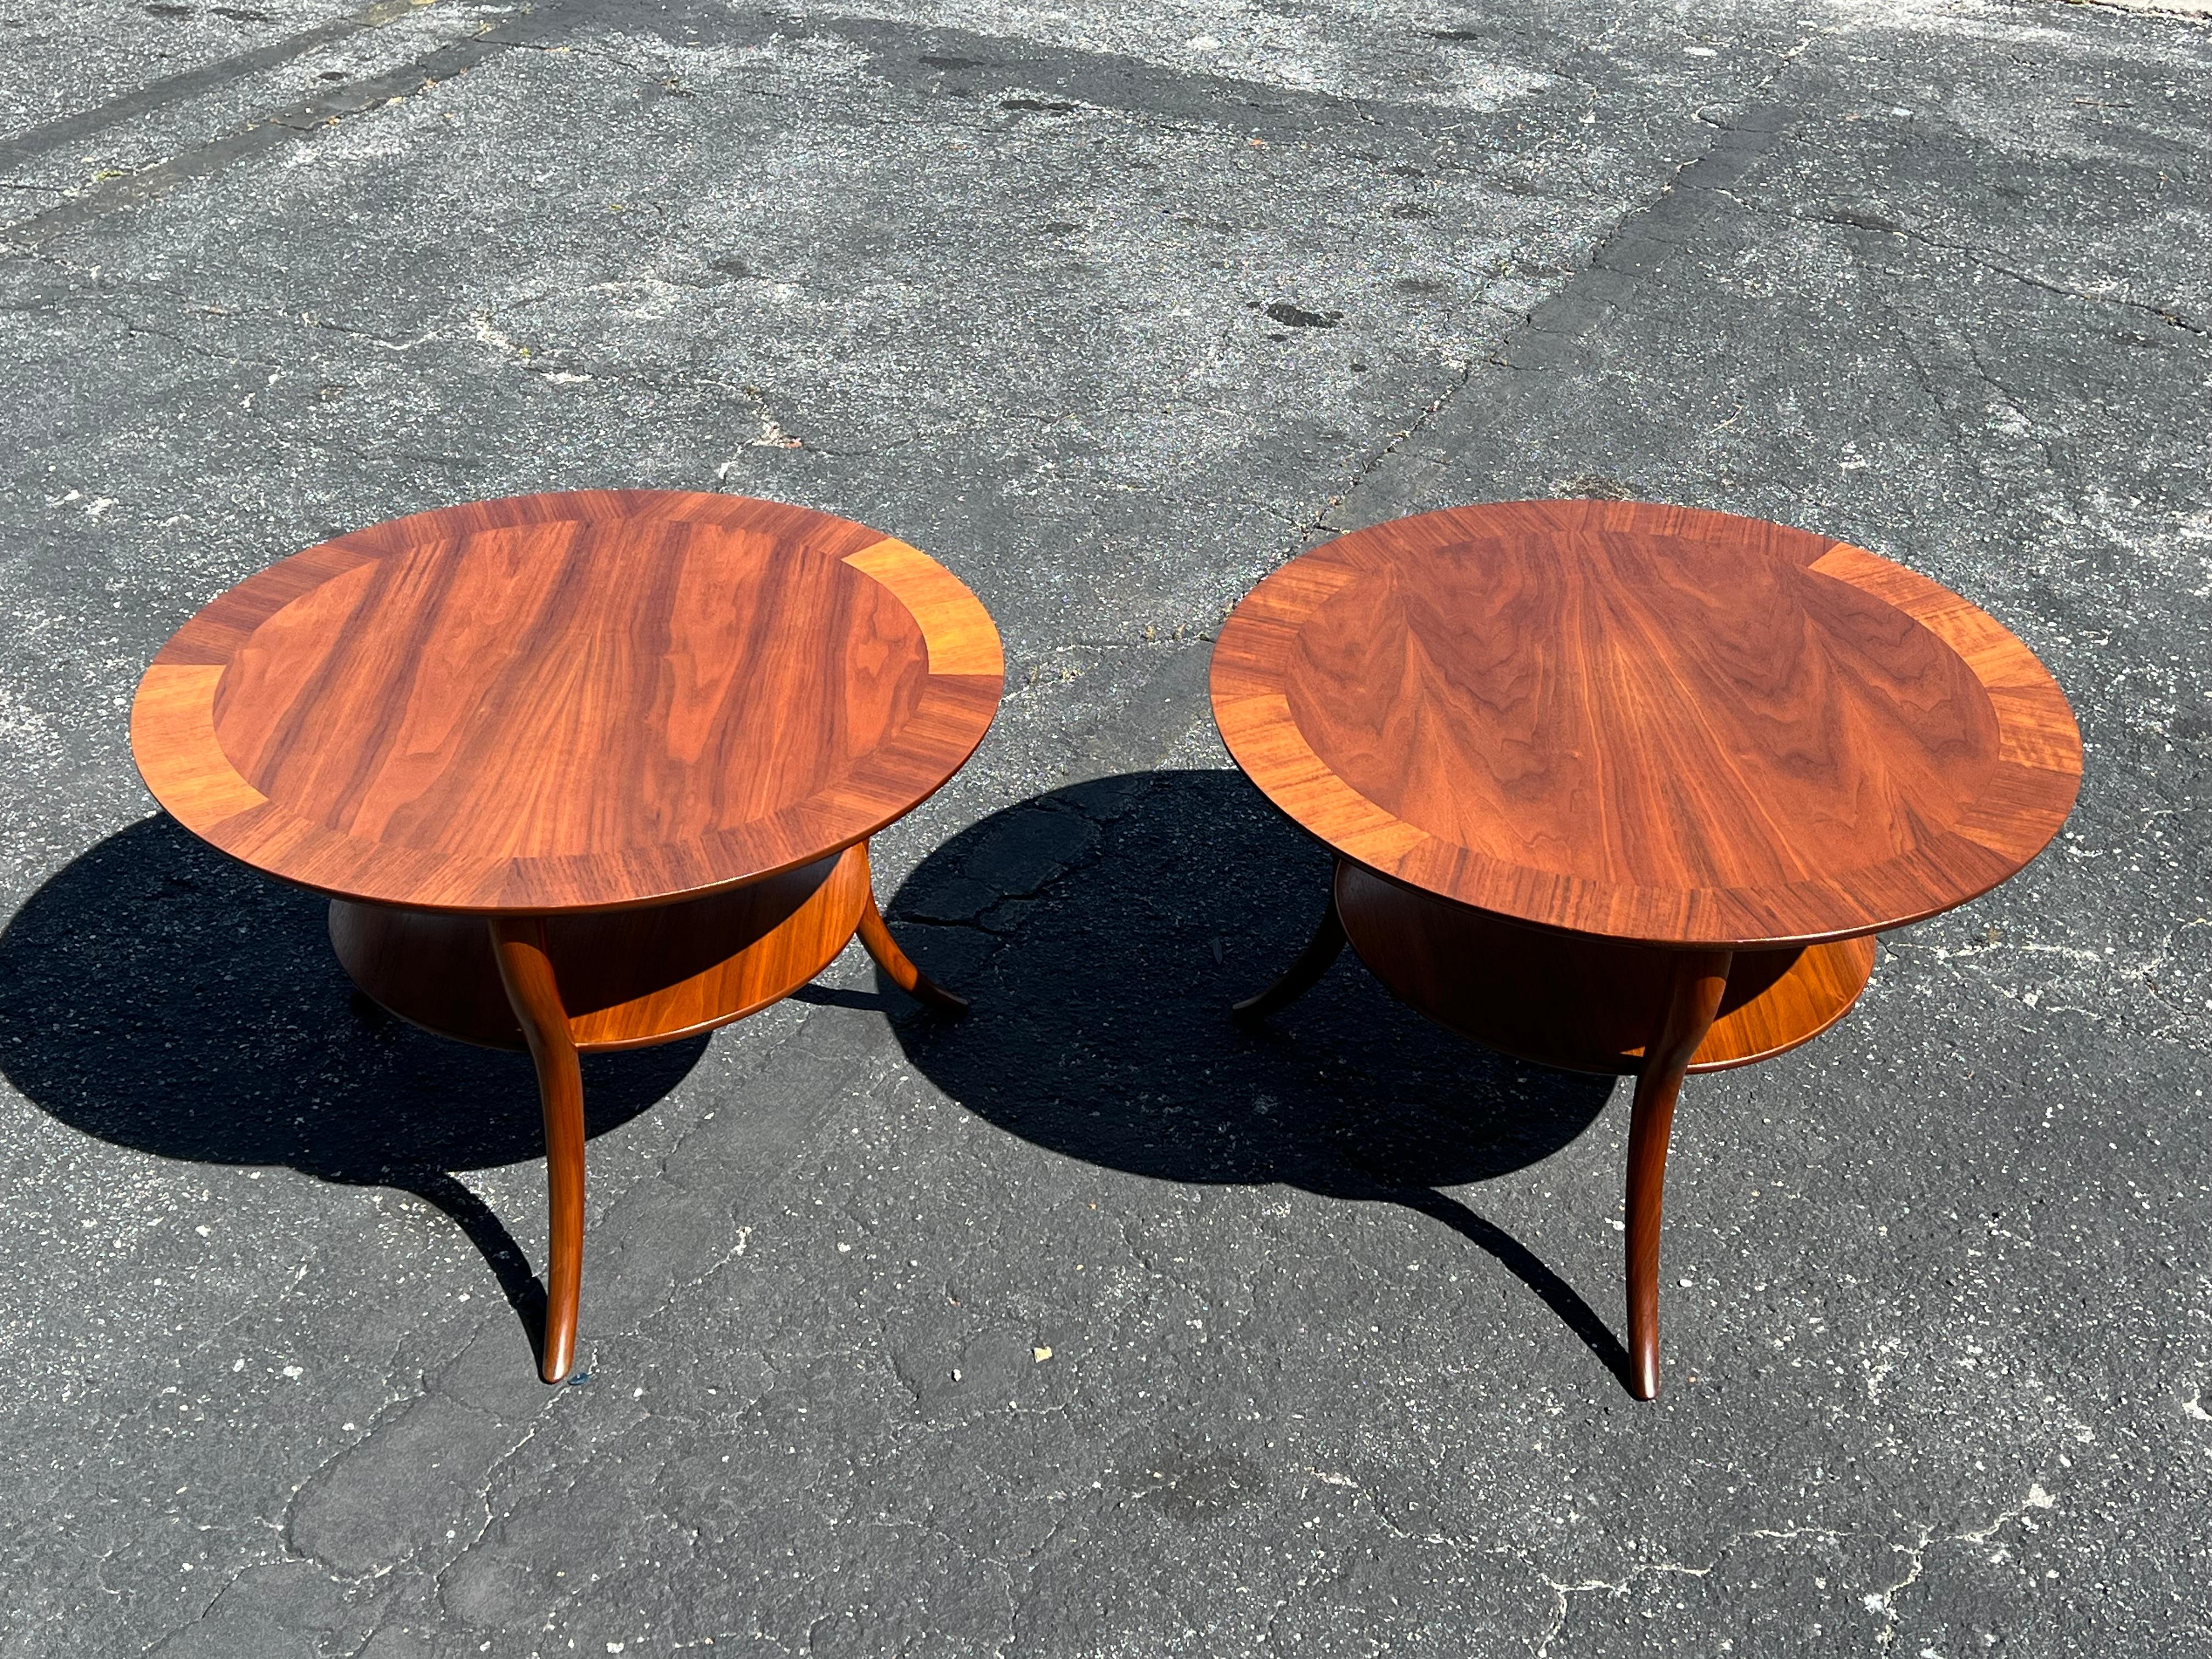 A classic T.H.Robsjohn-Gibbings for Widdicomb lamp or occasional tables with cabriolet style legs in walnut, with lower shelf. Elegant and stylish, restored. Walnut has beautiful graining. Sold invidually for $3,800 or $6,500 for the pair.